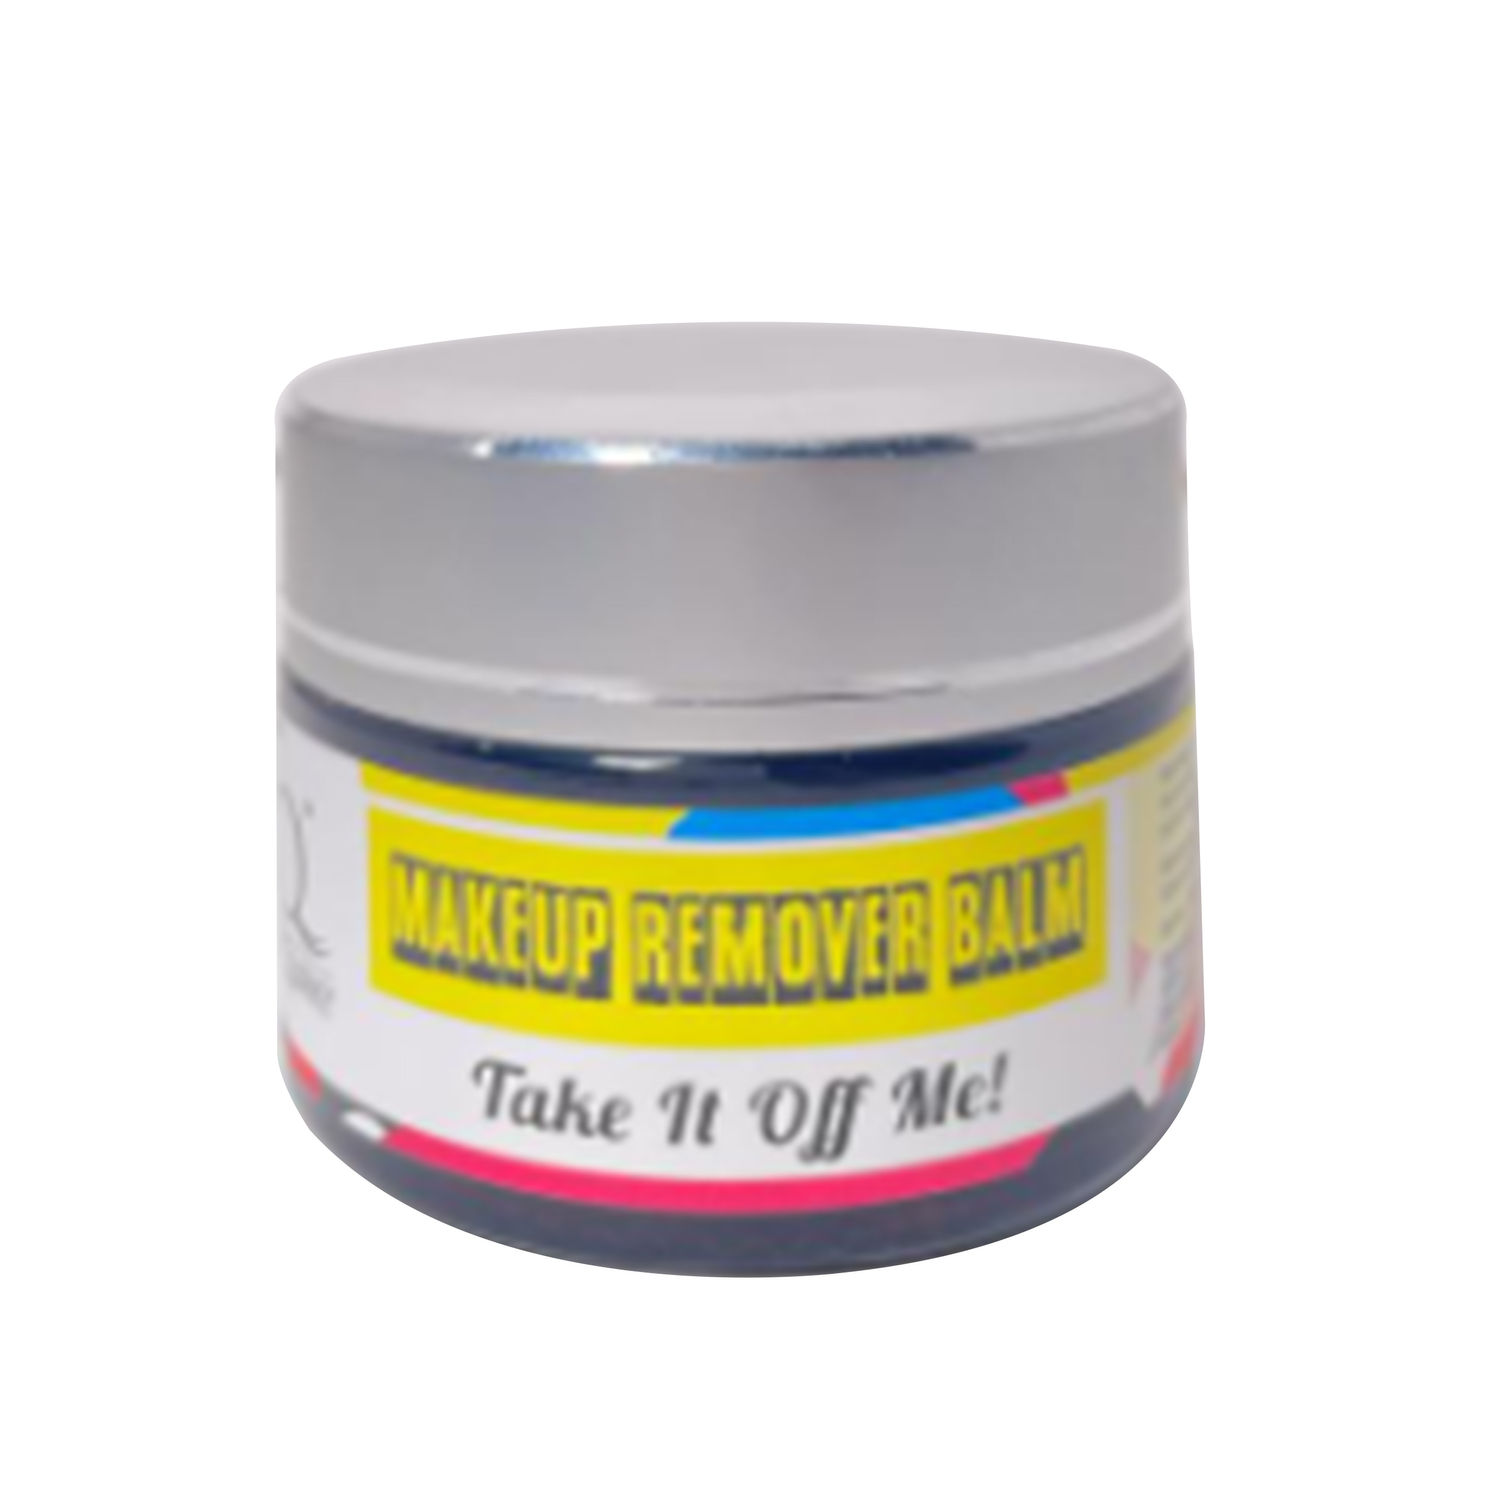 Stay Quirky Makeup Remover Balm - Take It Off Me! (30 g)